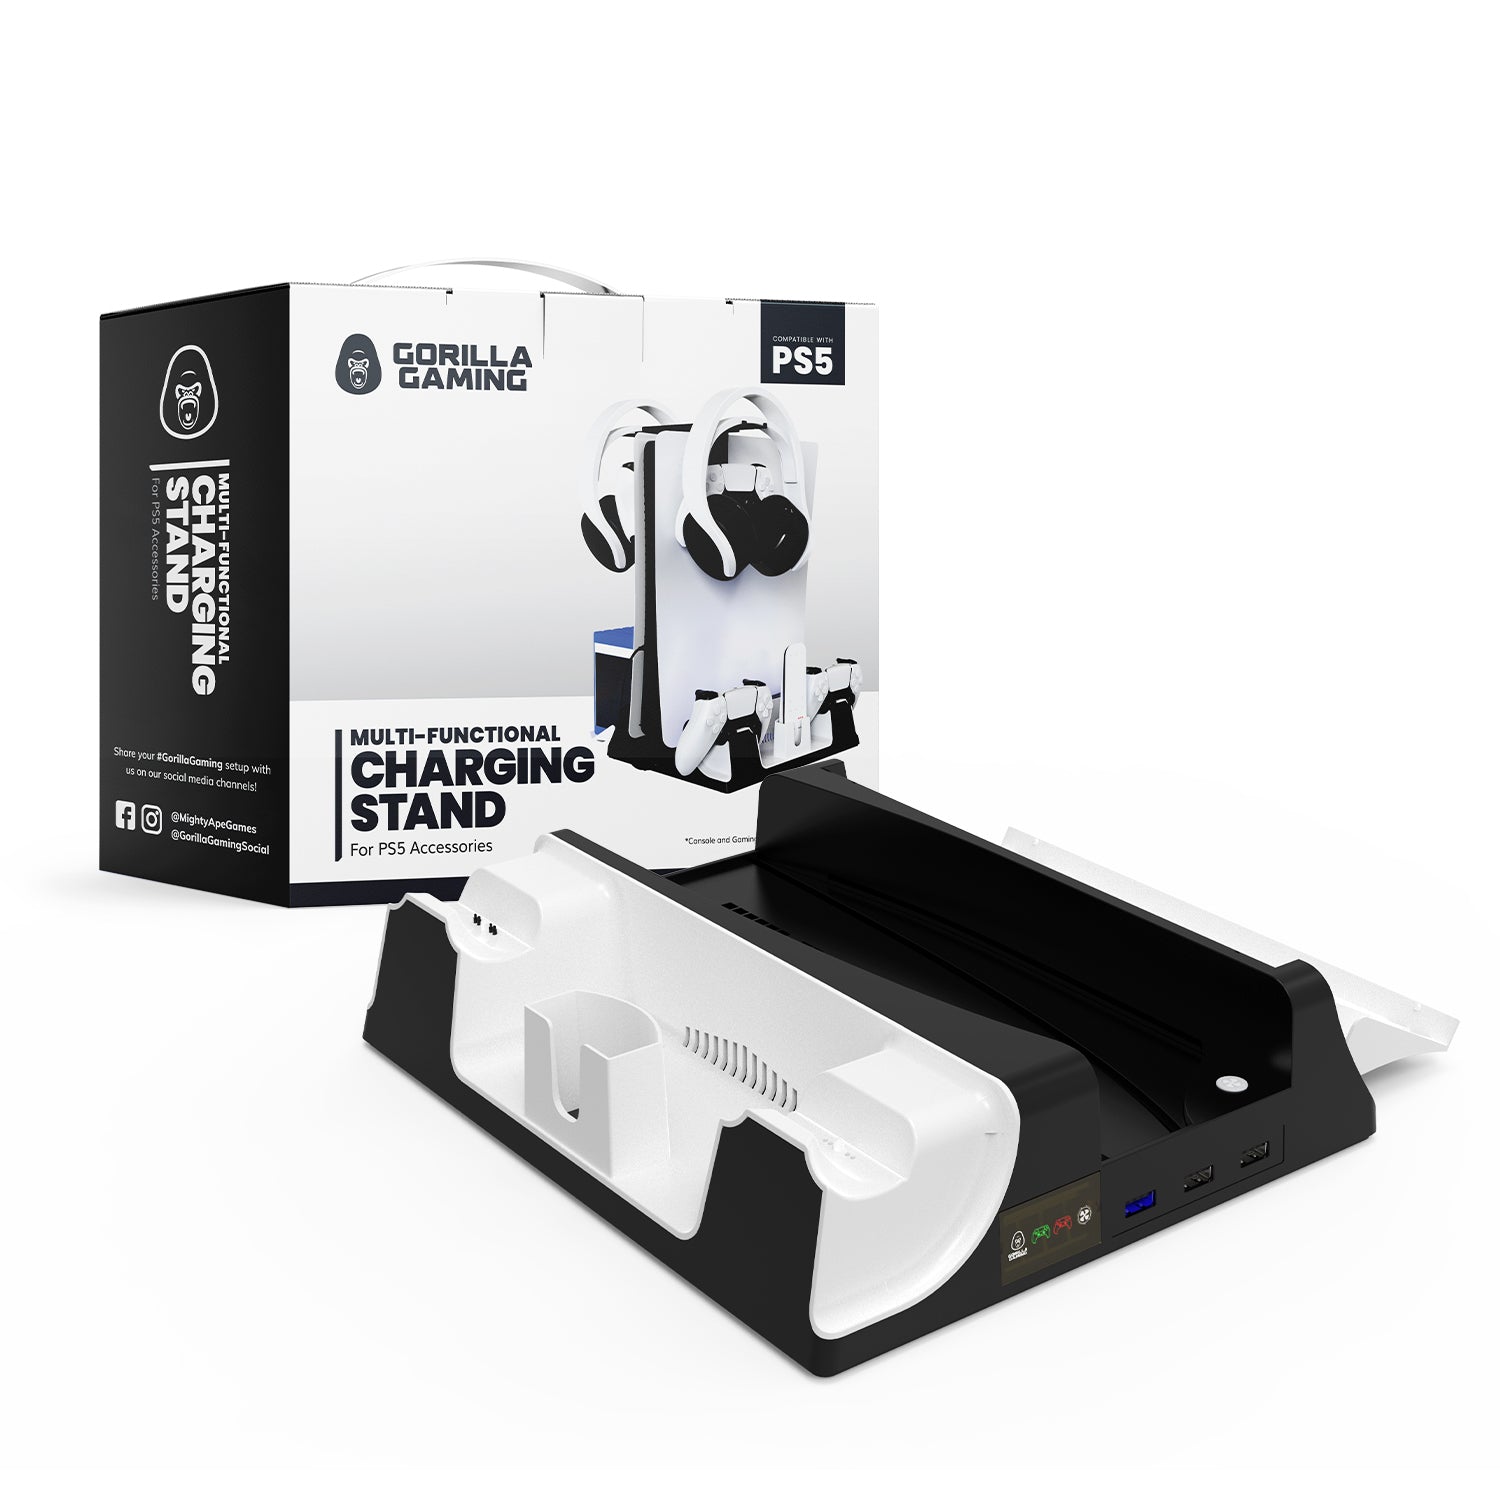 Gorilla Gaming Multi-functional Charging and Cooling Stand for PS5